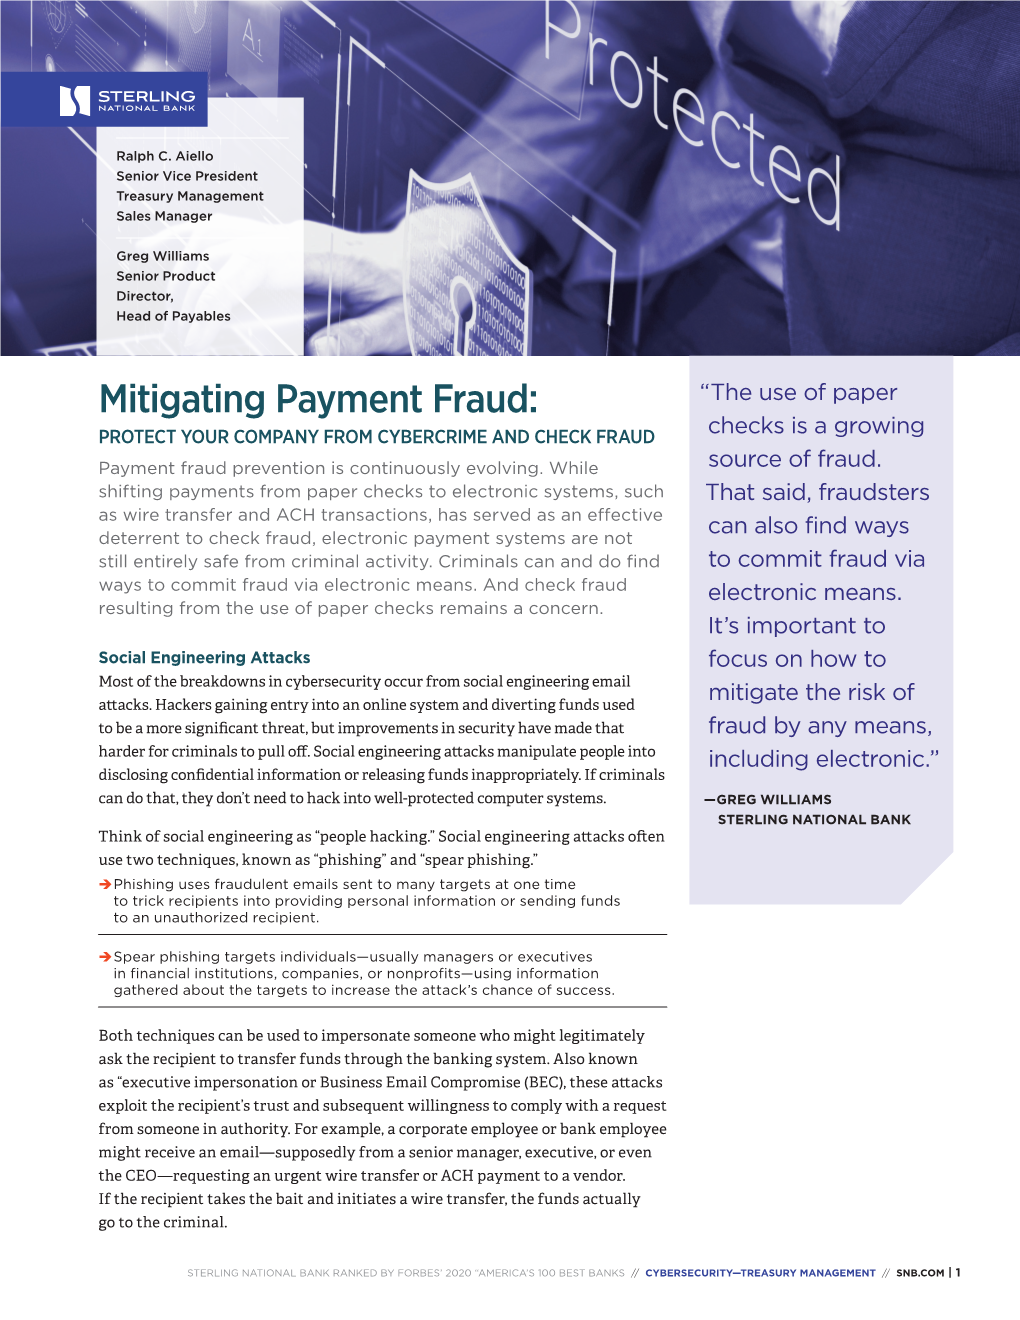 Mitigating Payment Fraud: “The Use of Paper Checks Is a Growing PROTECT YOUR COMPANY from CYBERCRIME and CHECK FRAUD Payment Fraud Prevention Is Continuously Evolving